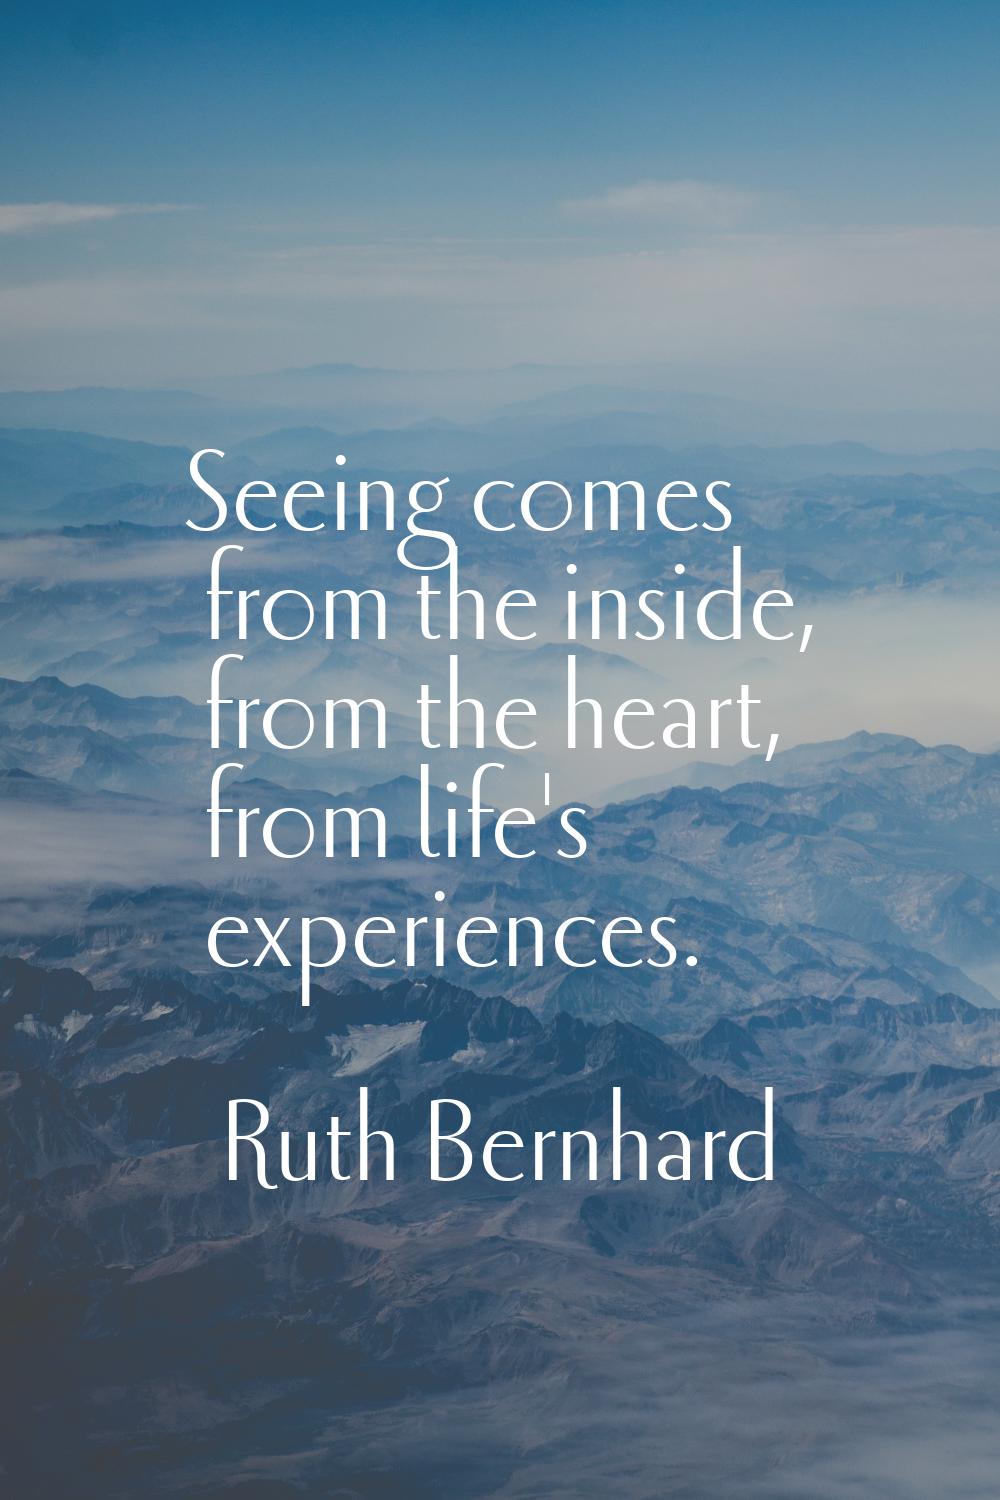 Seeing comes from the inside, from the heart, from life's experiences.